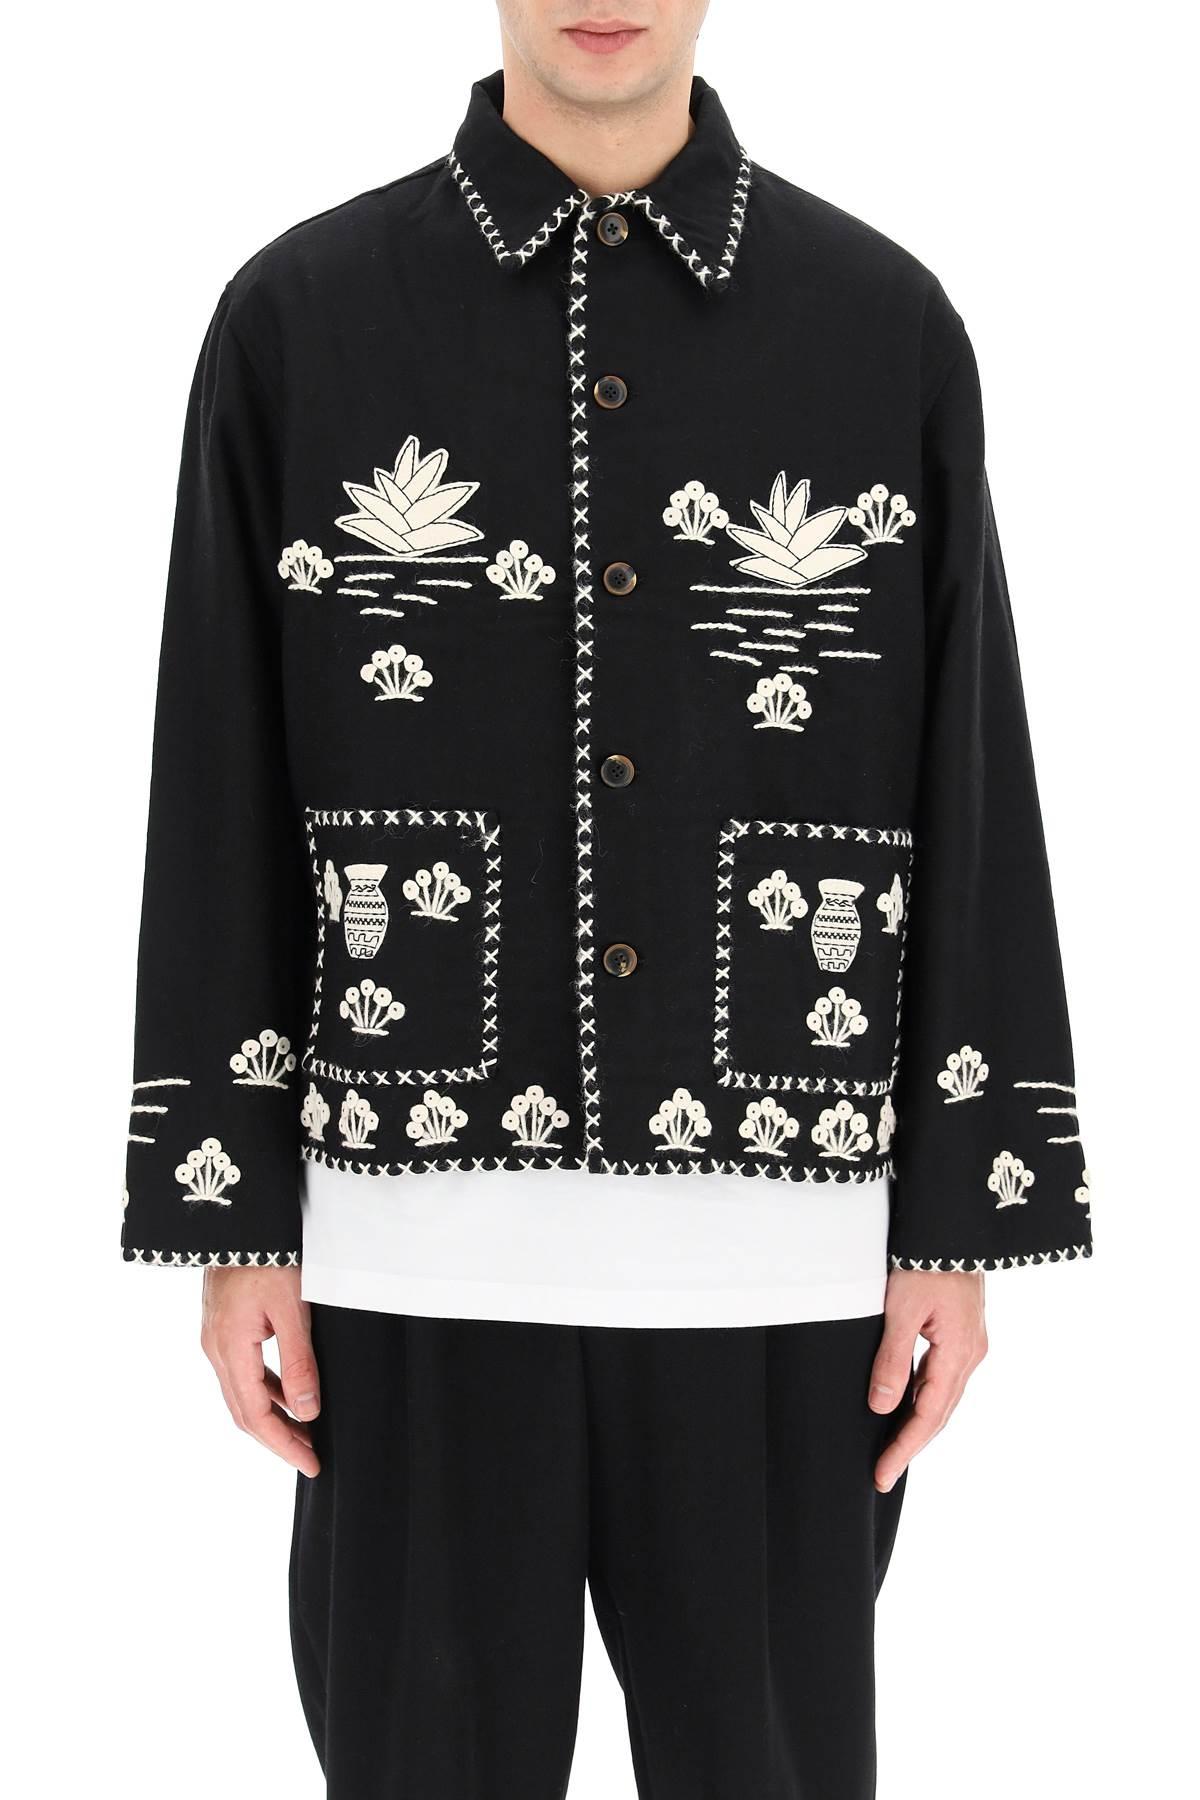 Bode Souvenir Jacket With Mexican Embroidery in Black for Men